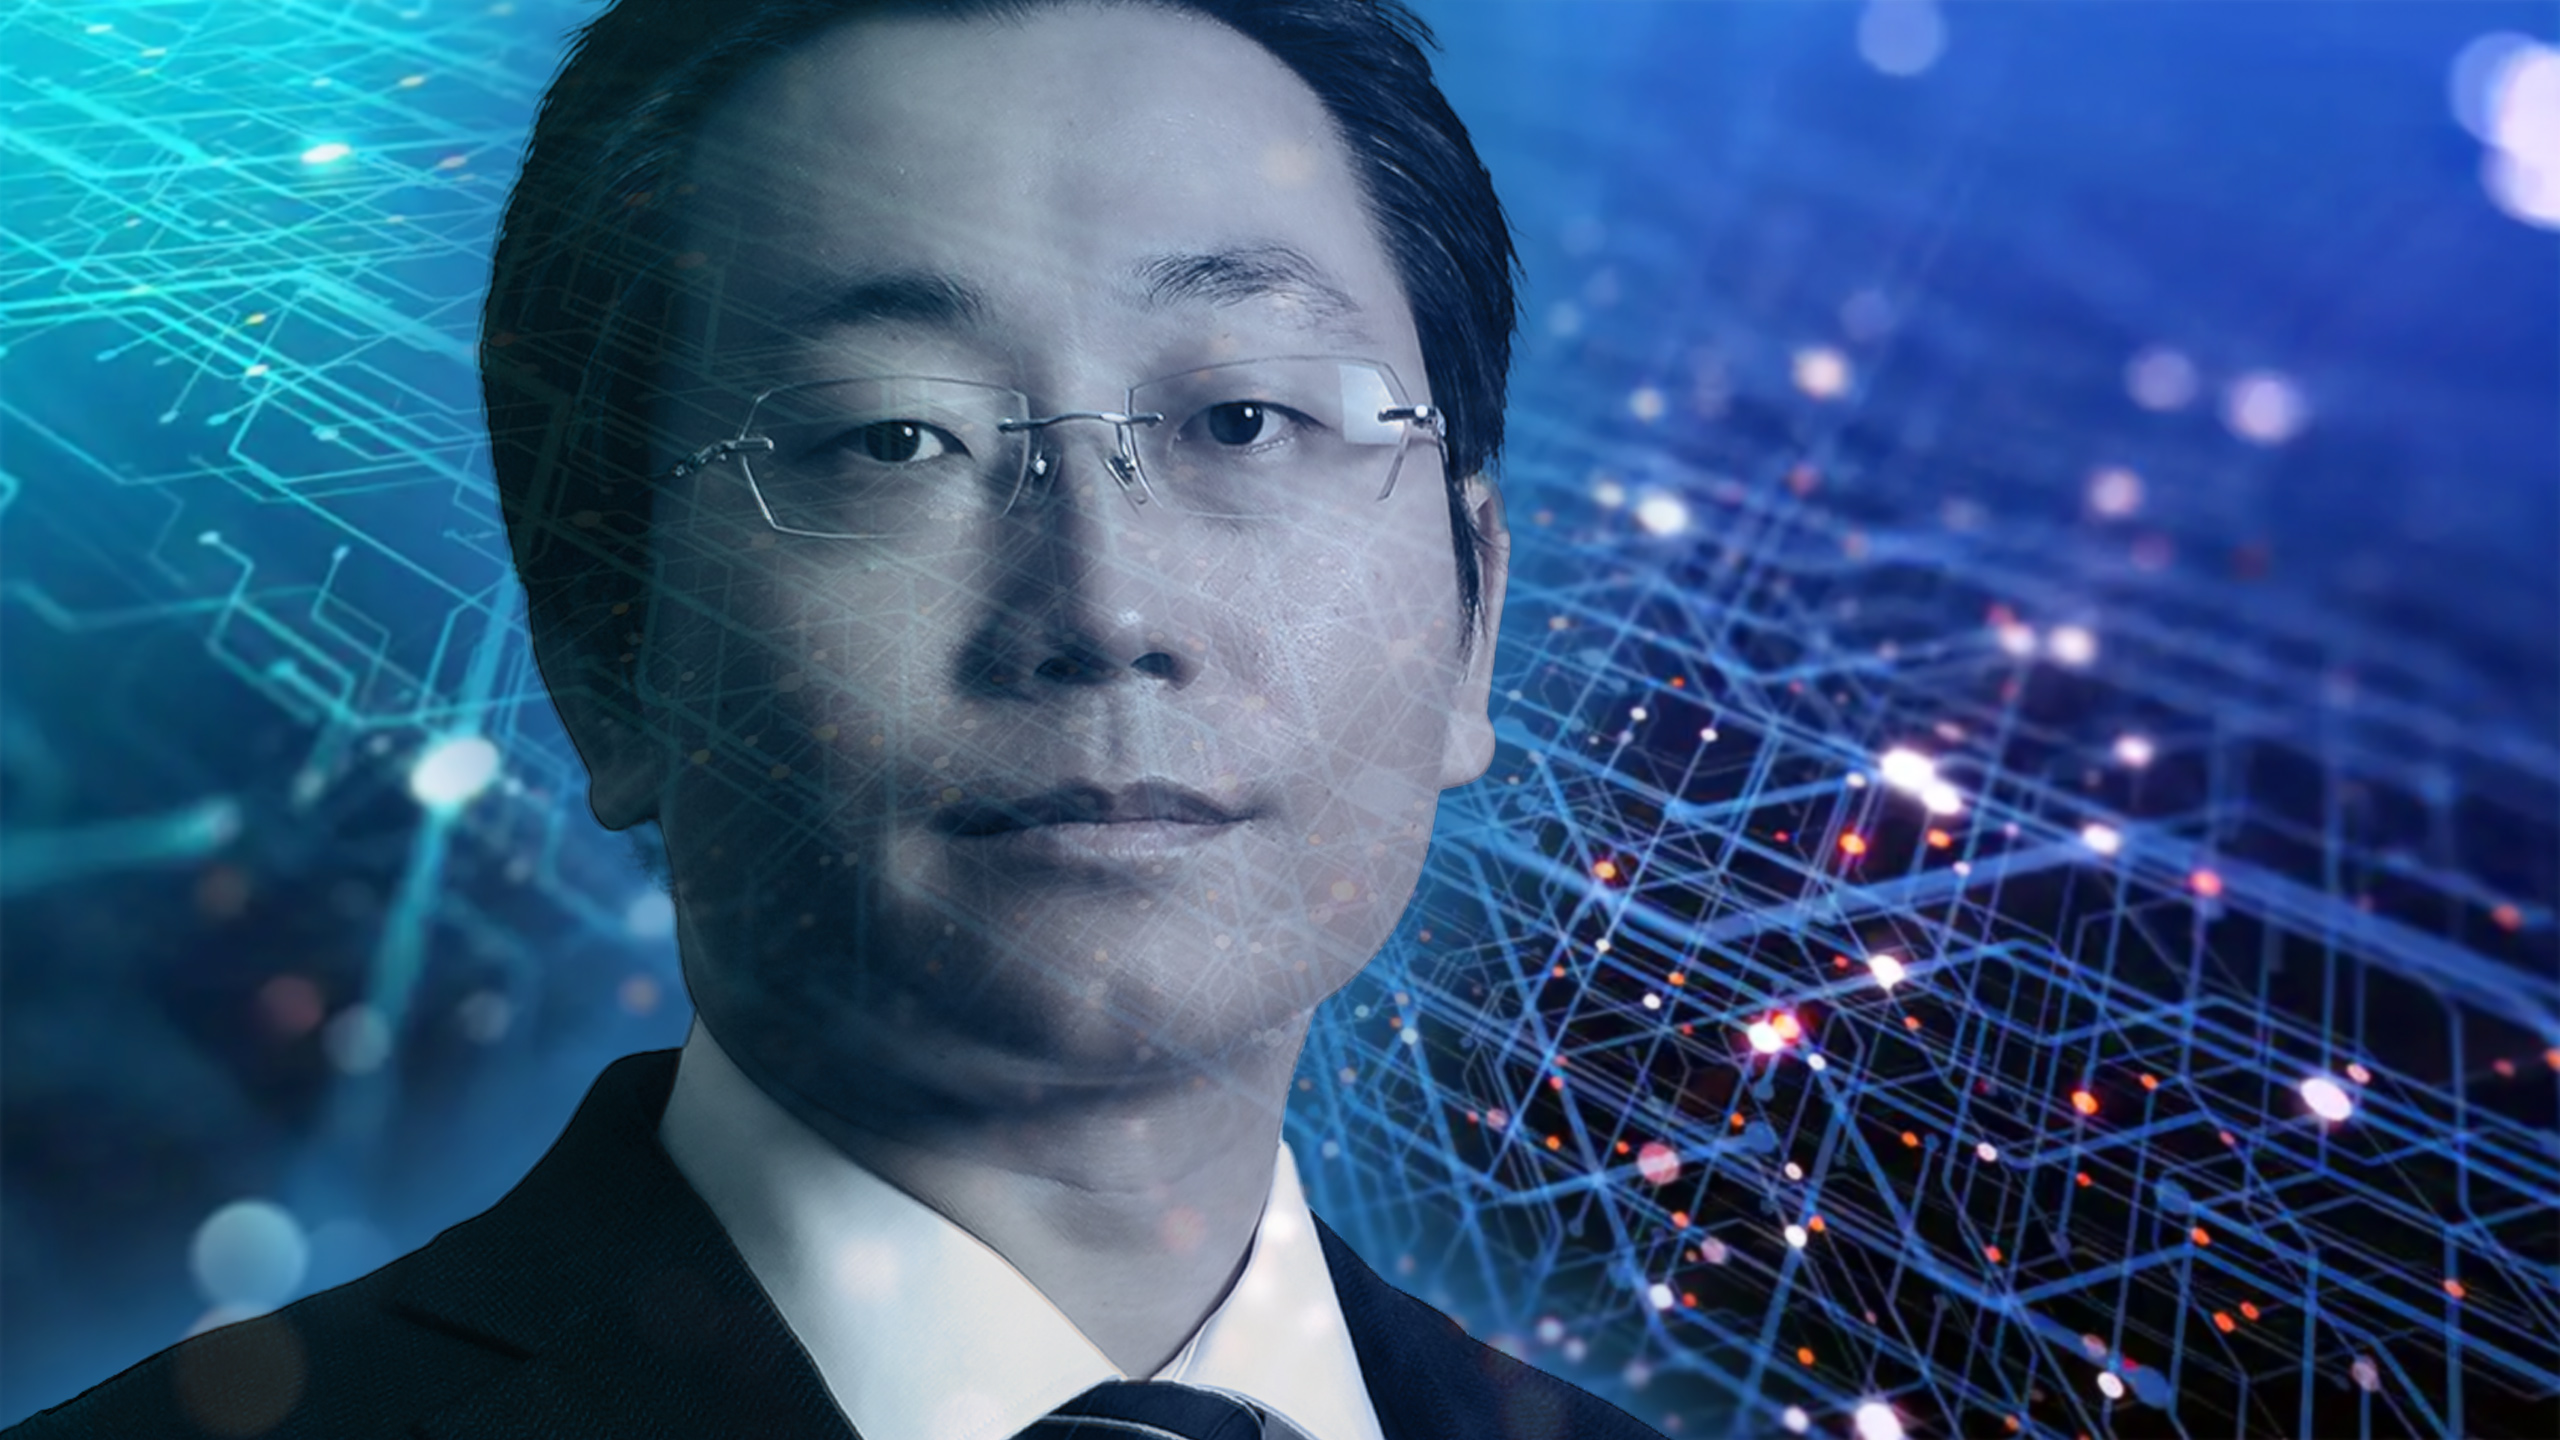 Meet Zhishan Guo: The New Face in Cyber-Physical Systems